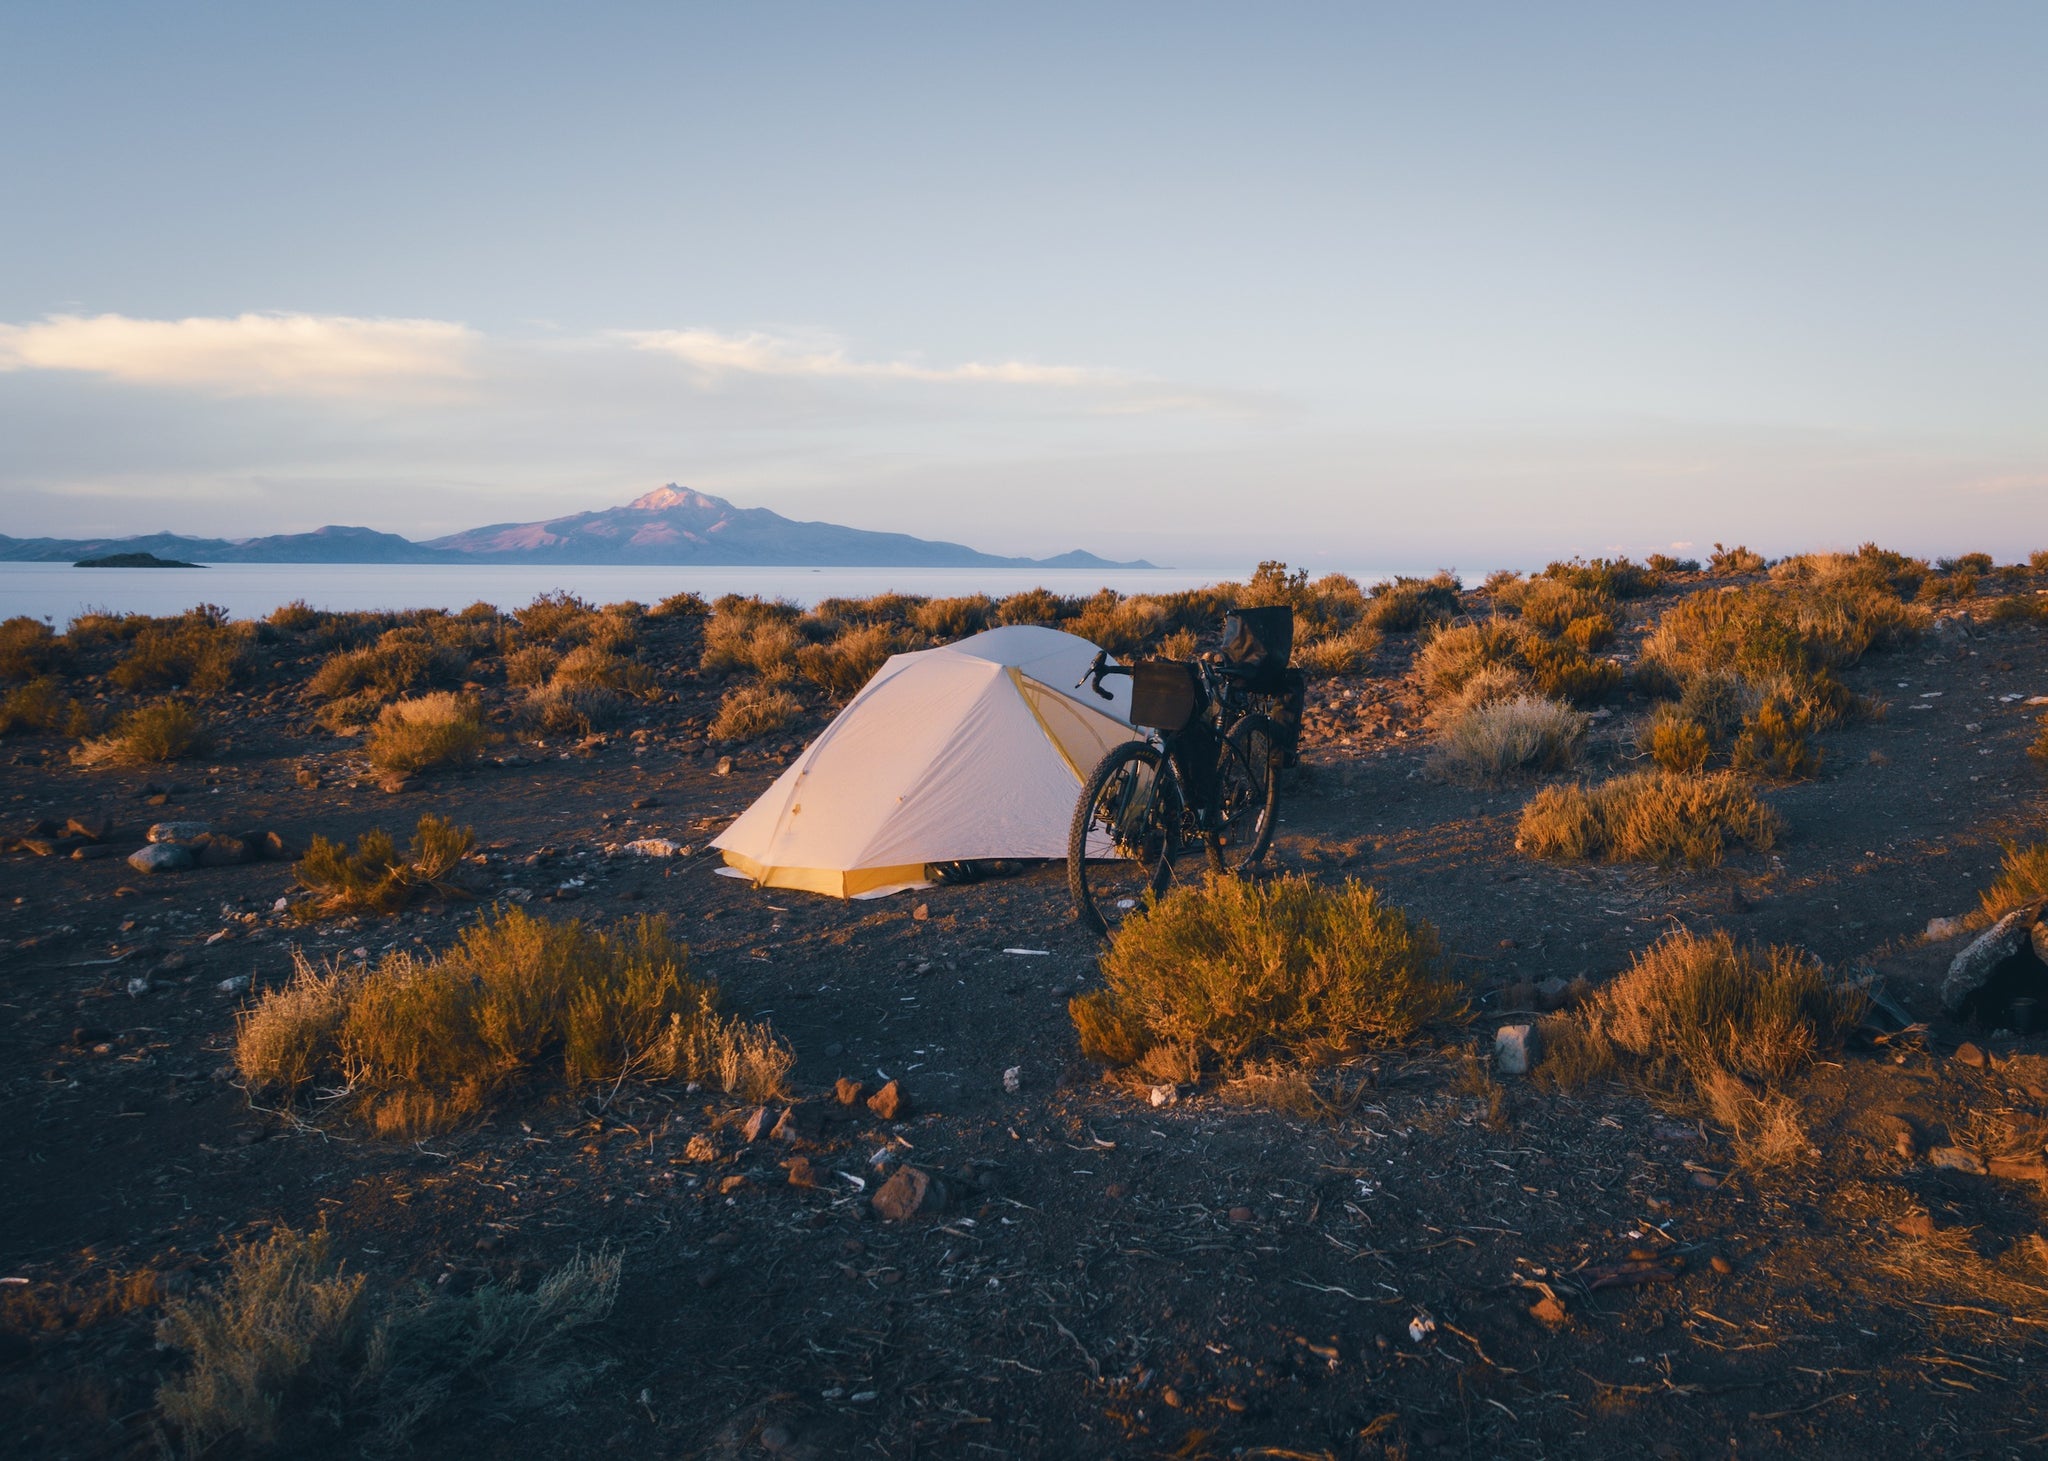 Tent camping in the desert